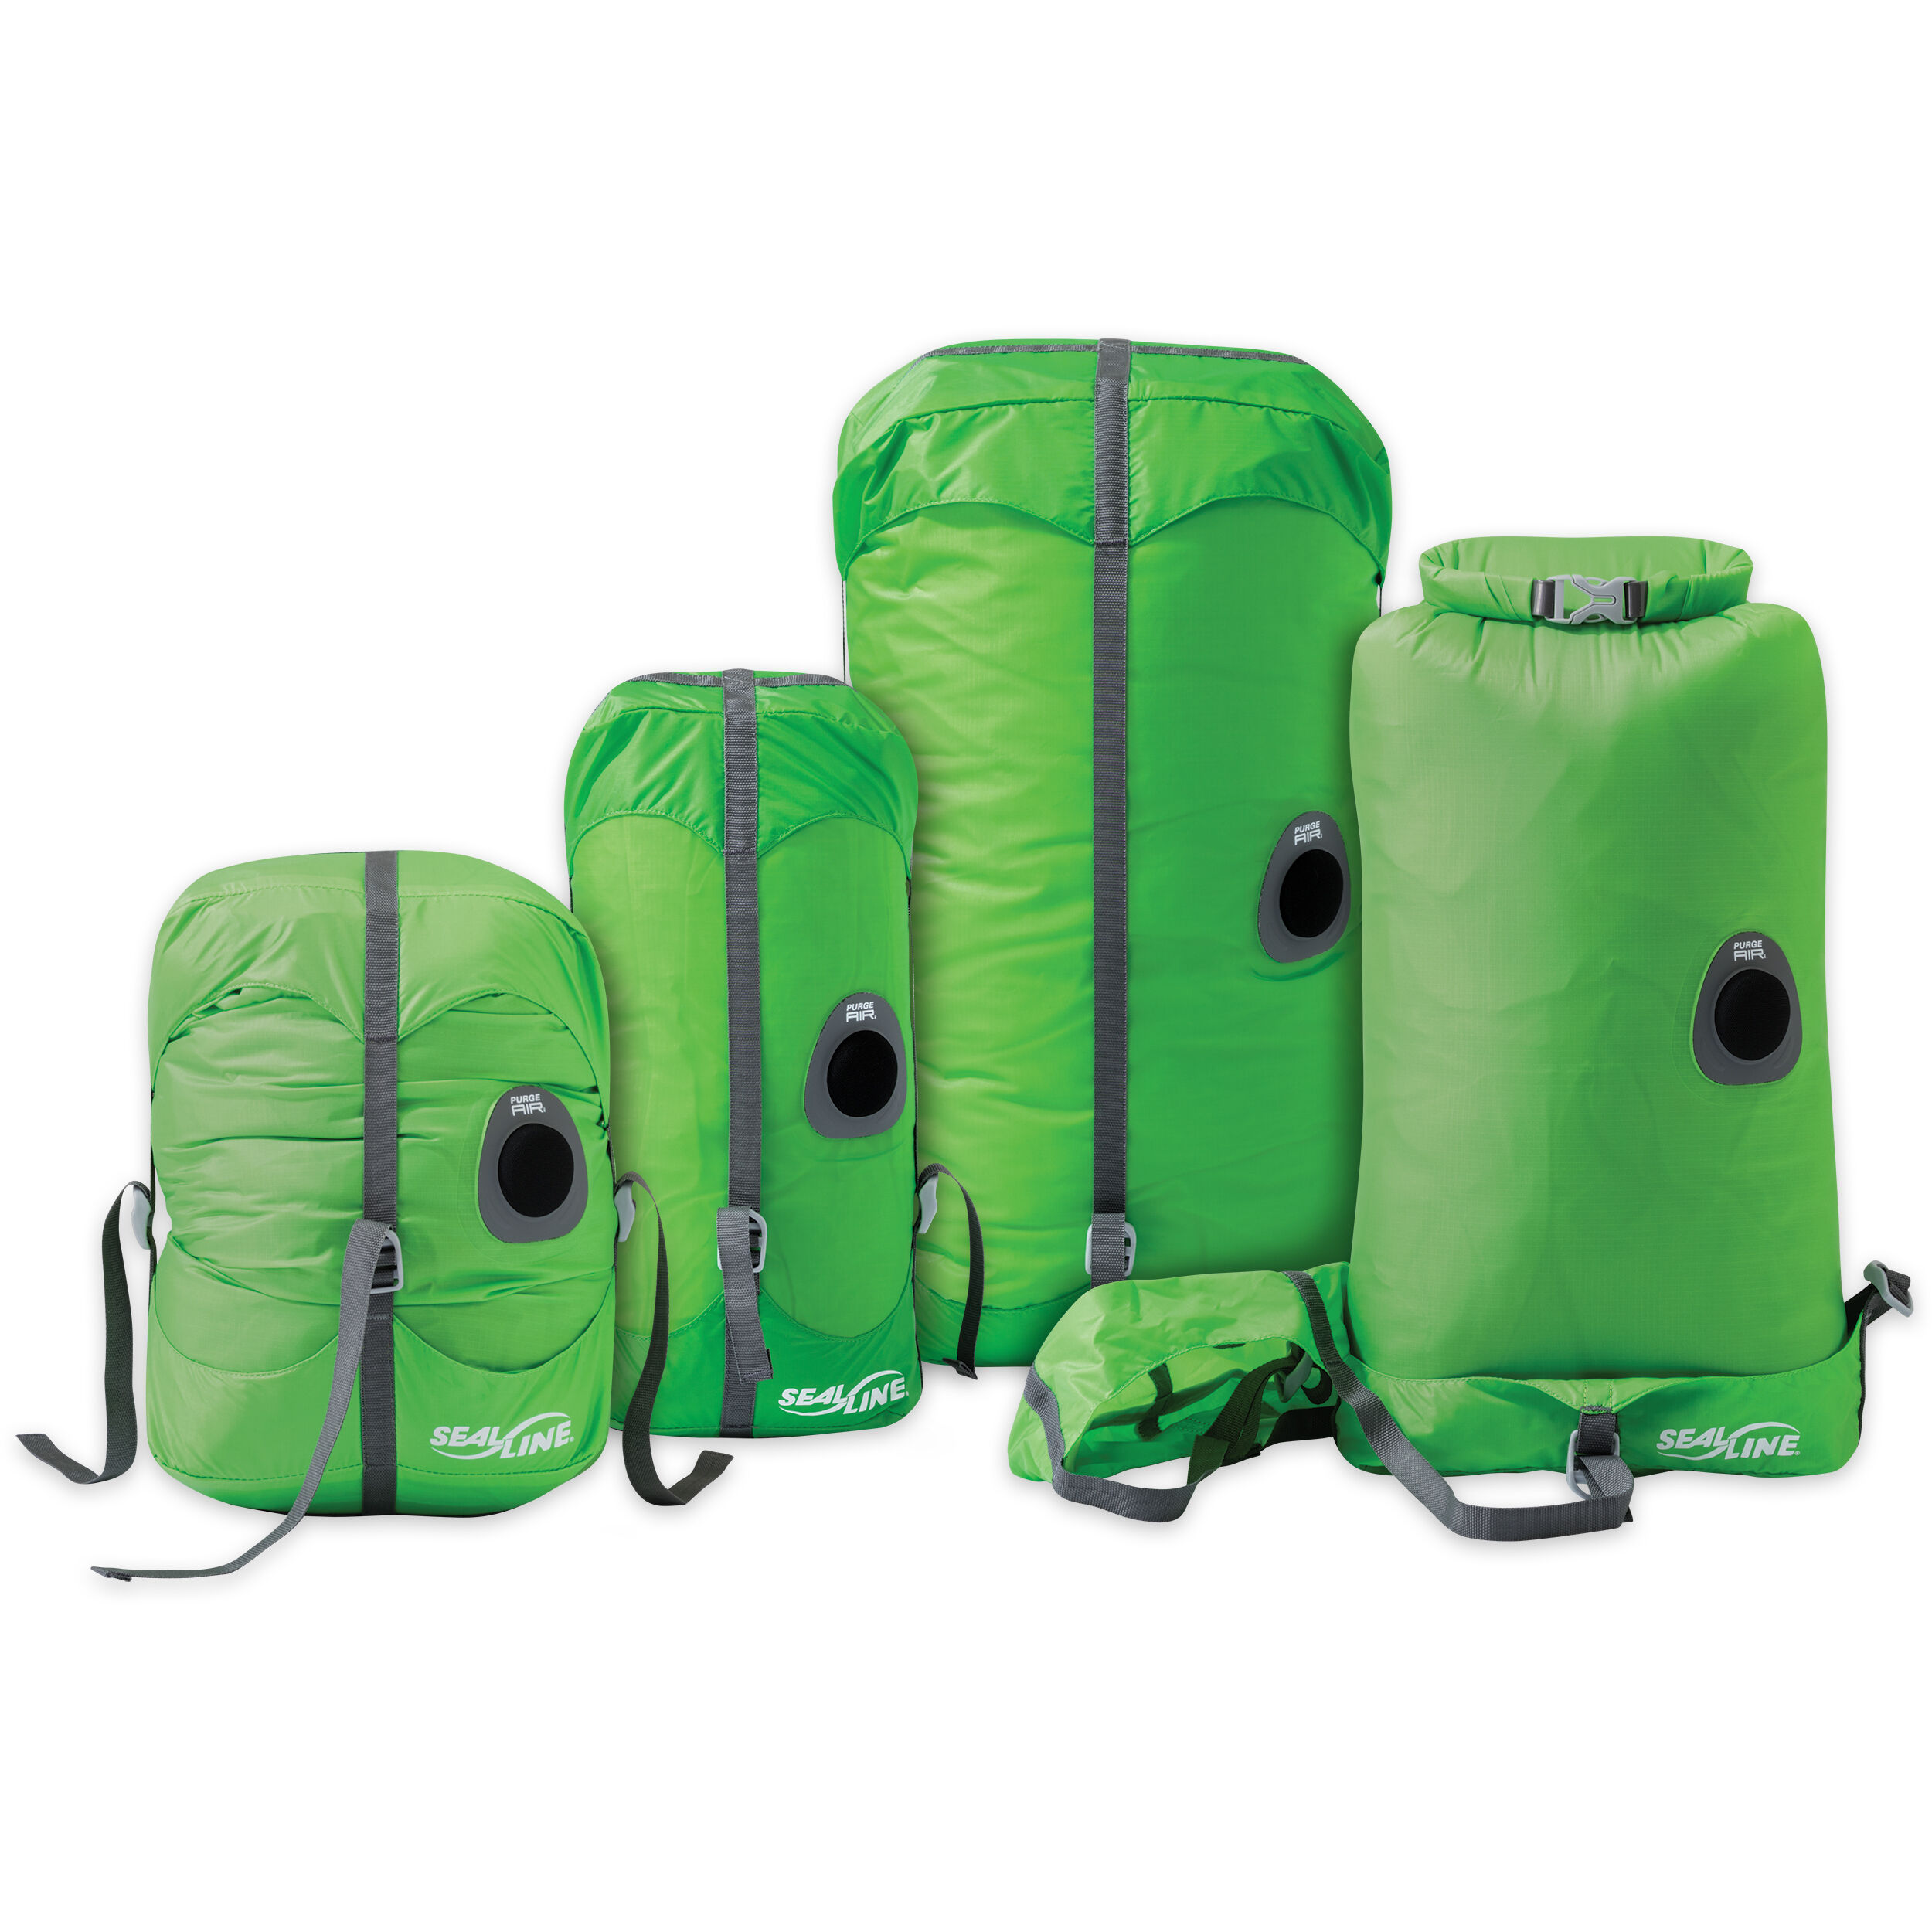 SealLine® gear protection - dry bags, backpacks, totes, duffles